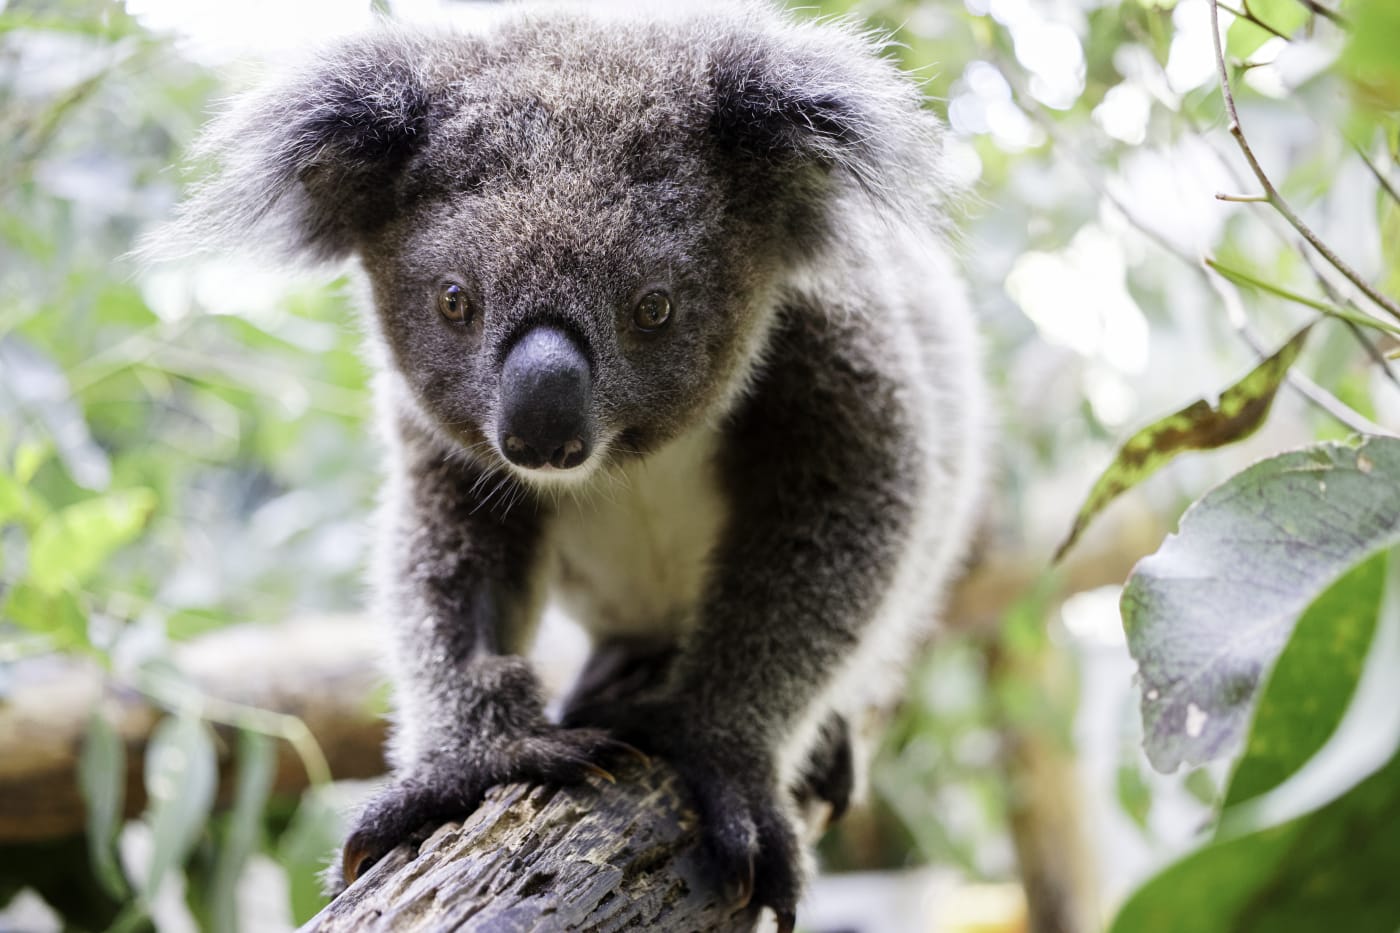 Gulliver is a 14-month-old koala joey. Friends of the Koala (FOTK) rescuers found him on the ground cold and alone in Tregeagle, NSW amid the Northern Rivers flood crisis. His mother sadly couldn't be found, so Gulliver was  assessed and then put into home care with a koala carer